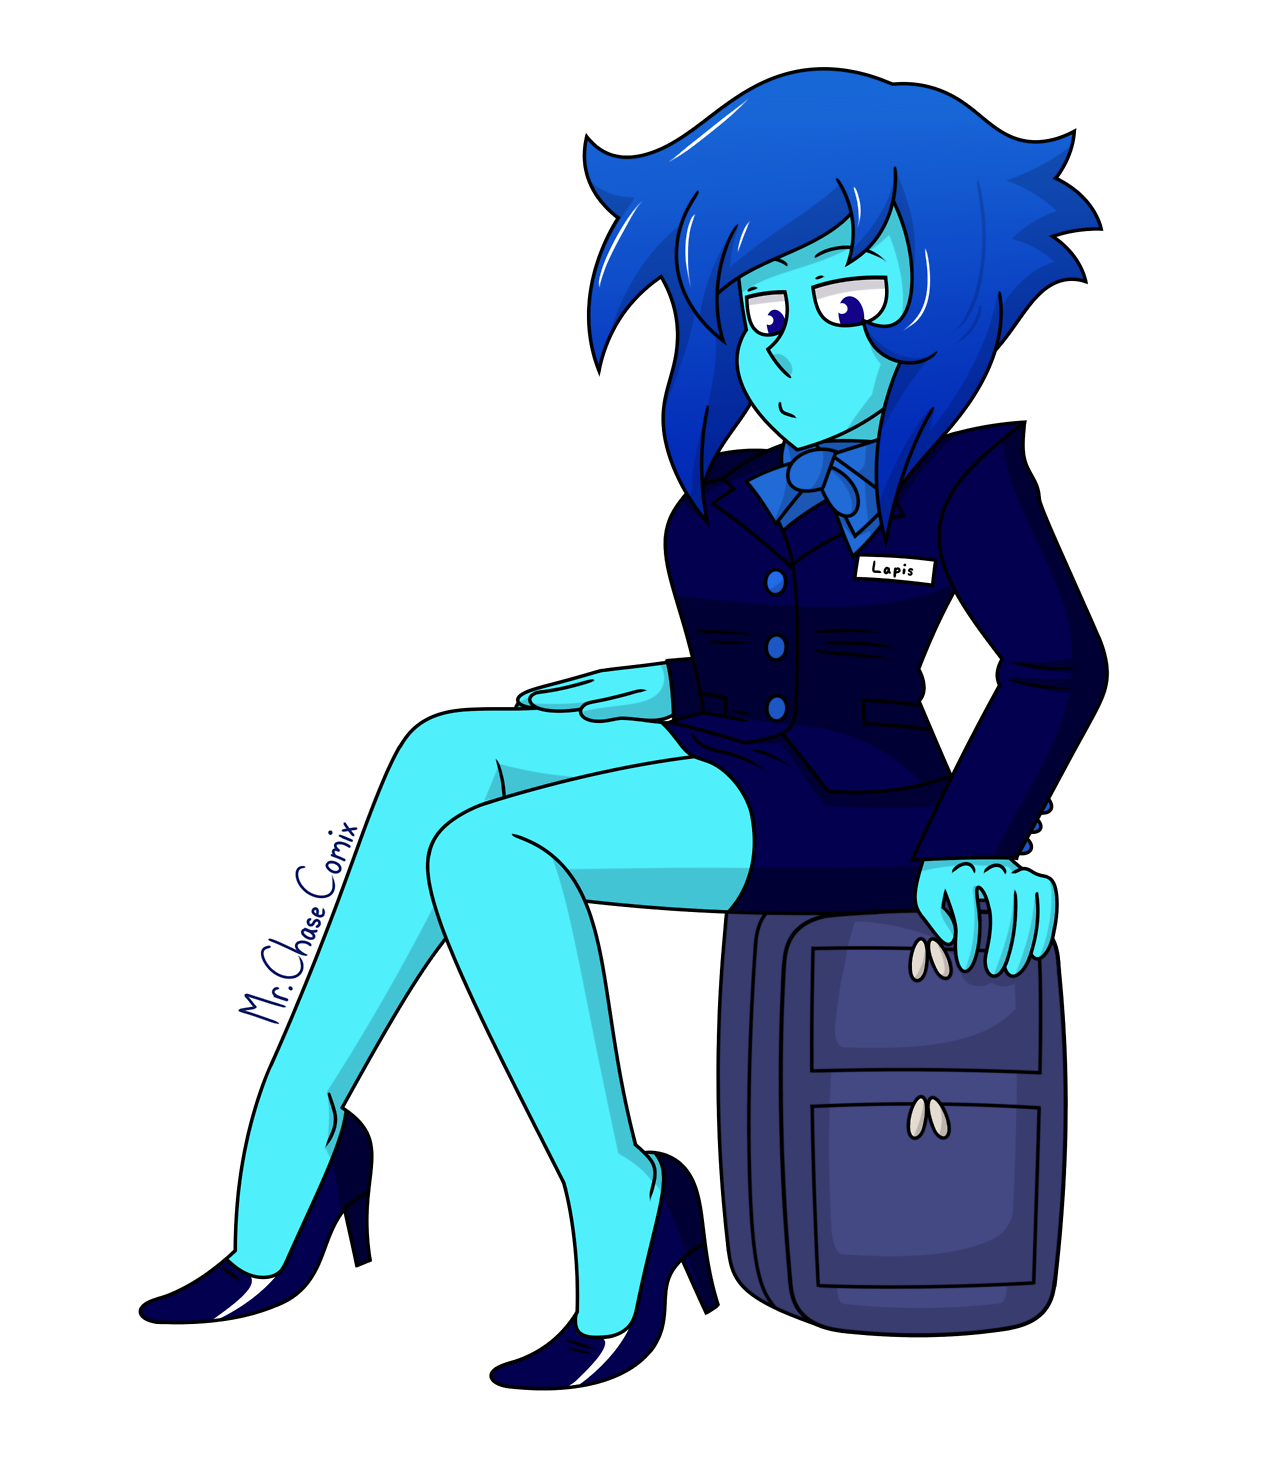 Would flight attendant Lapis be okay with you, anon?